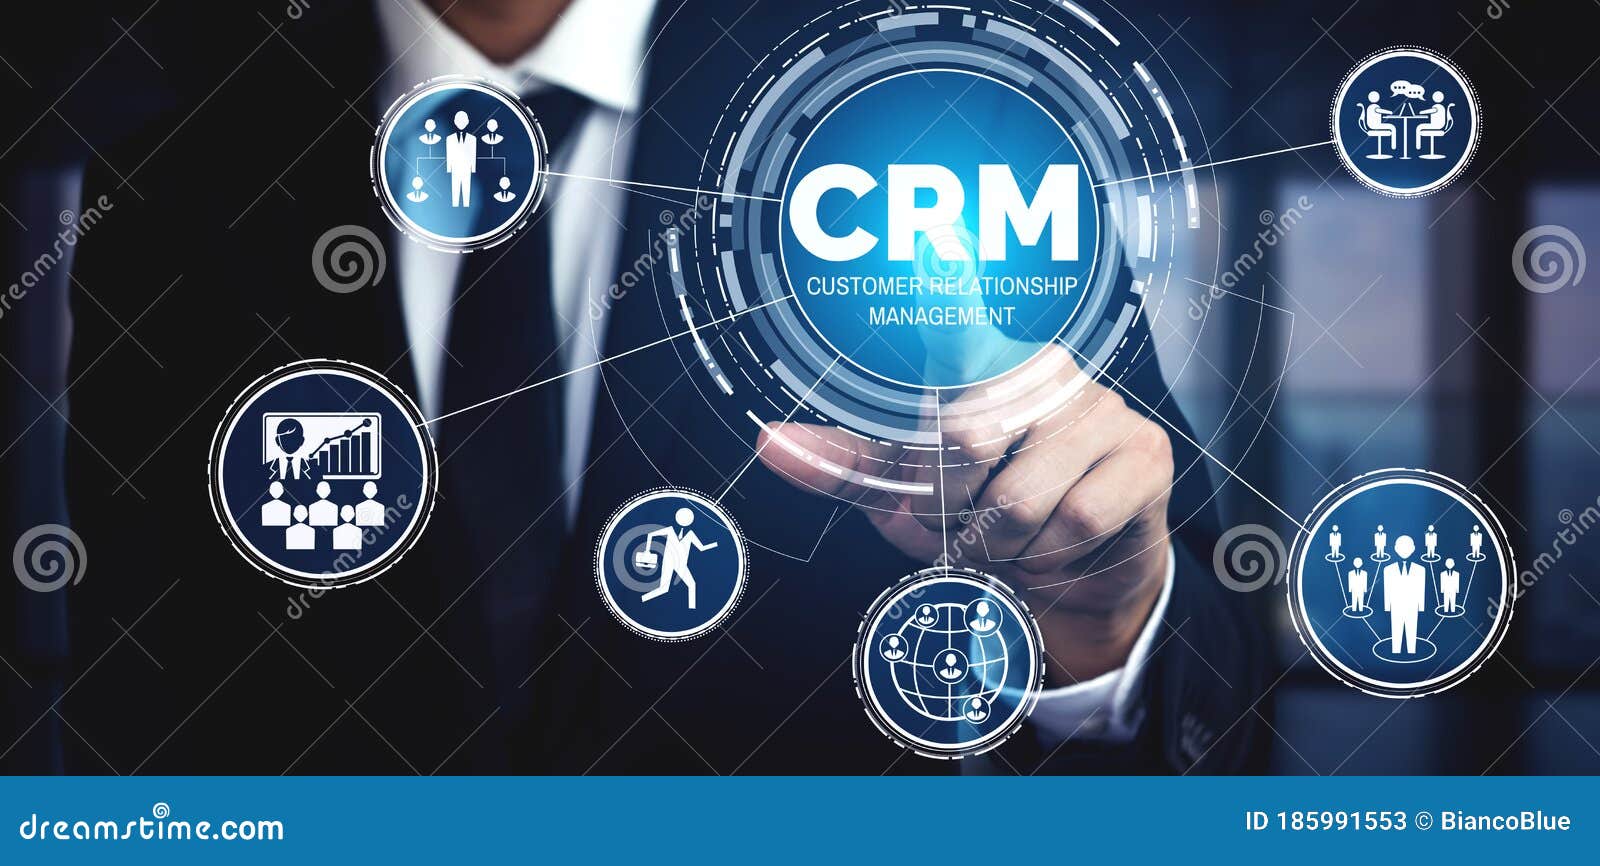 CRM Customer Relationship Management Business Sales Marketing System Concept Stock Image - of recruitment, service: